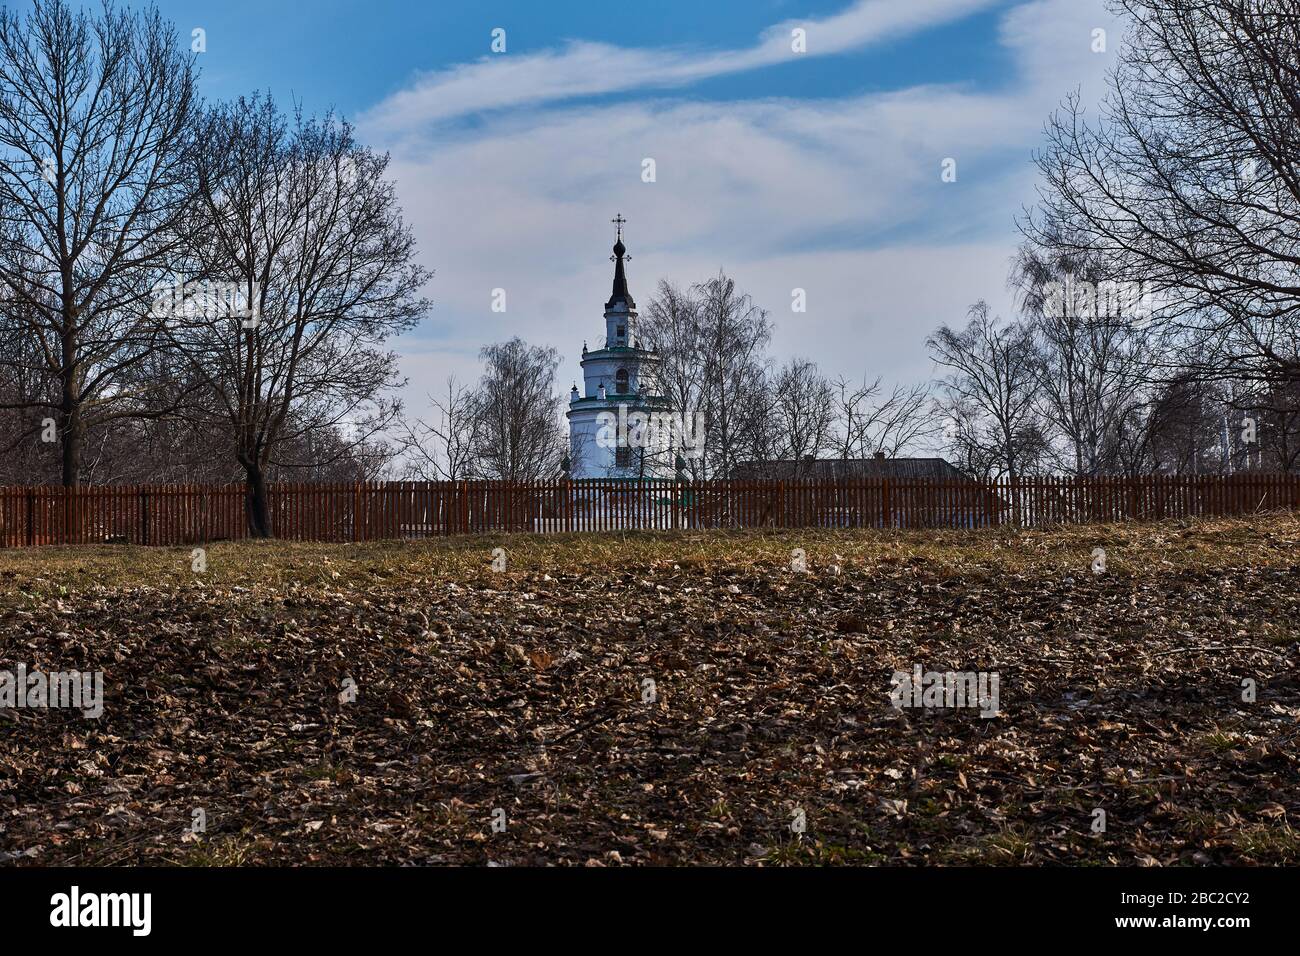 Ancient orthodox temple among trees. Landscape of central Russia. Windows, roof and doors are visible through branches. The village of Big Boldino. Stock Photo